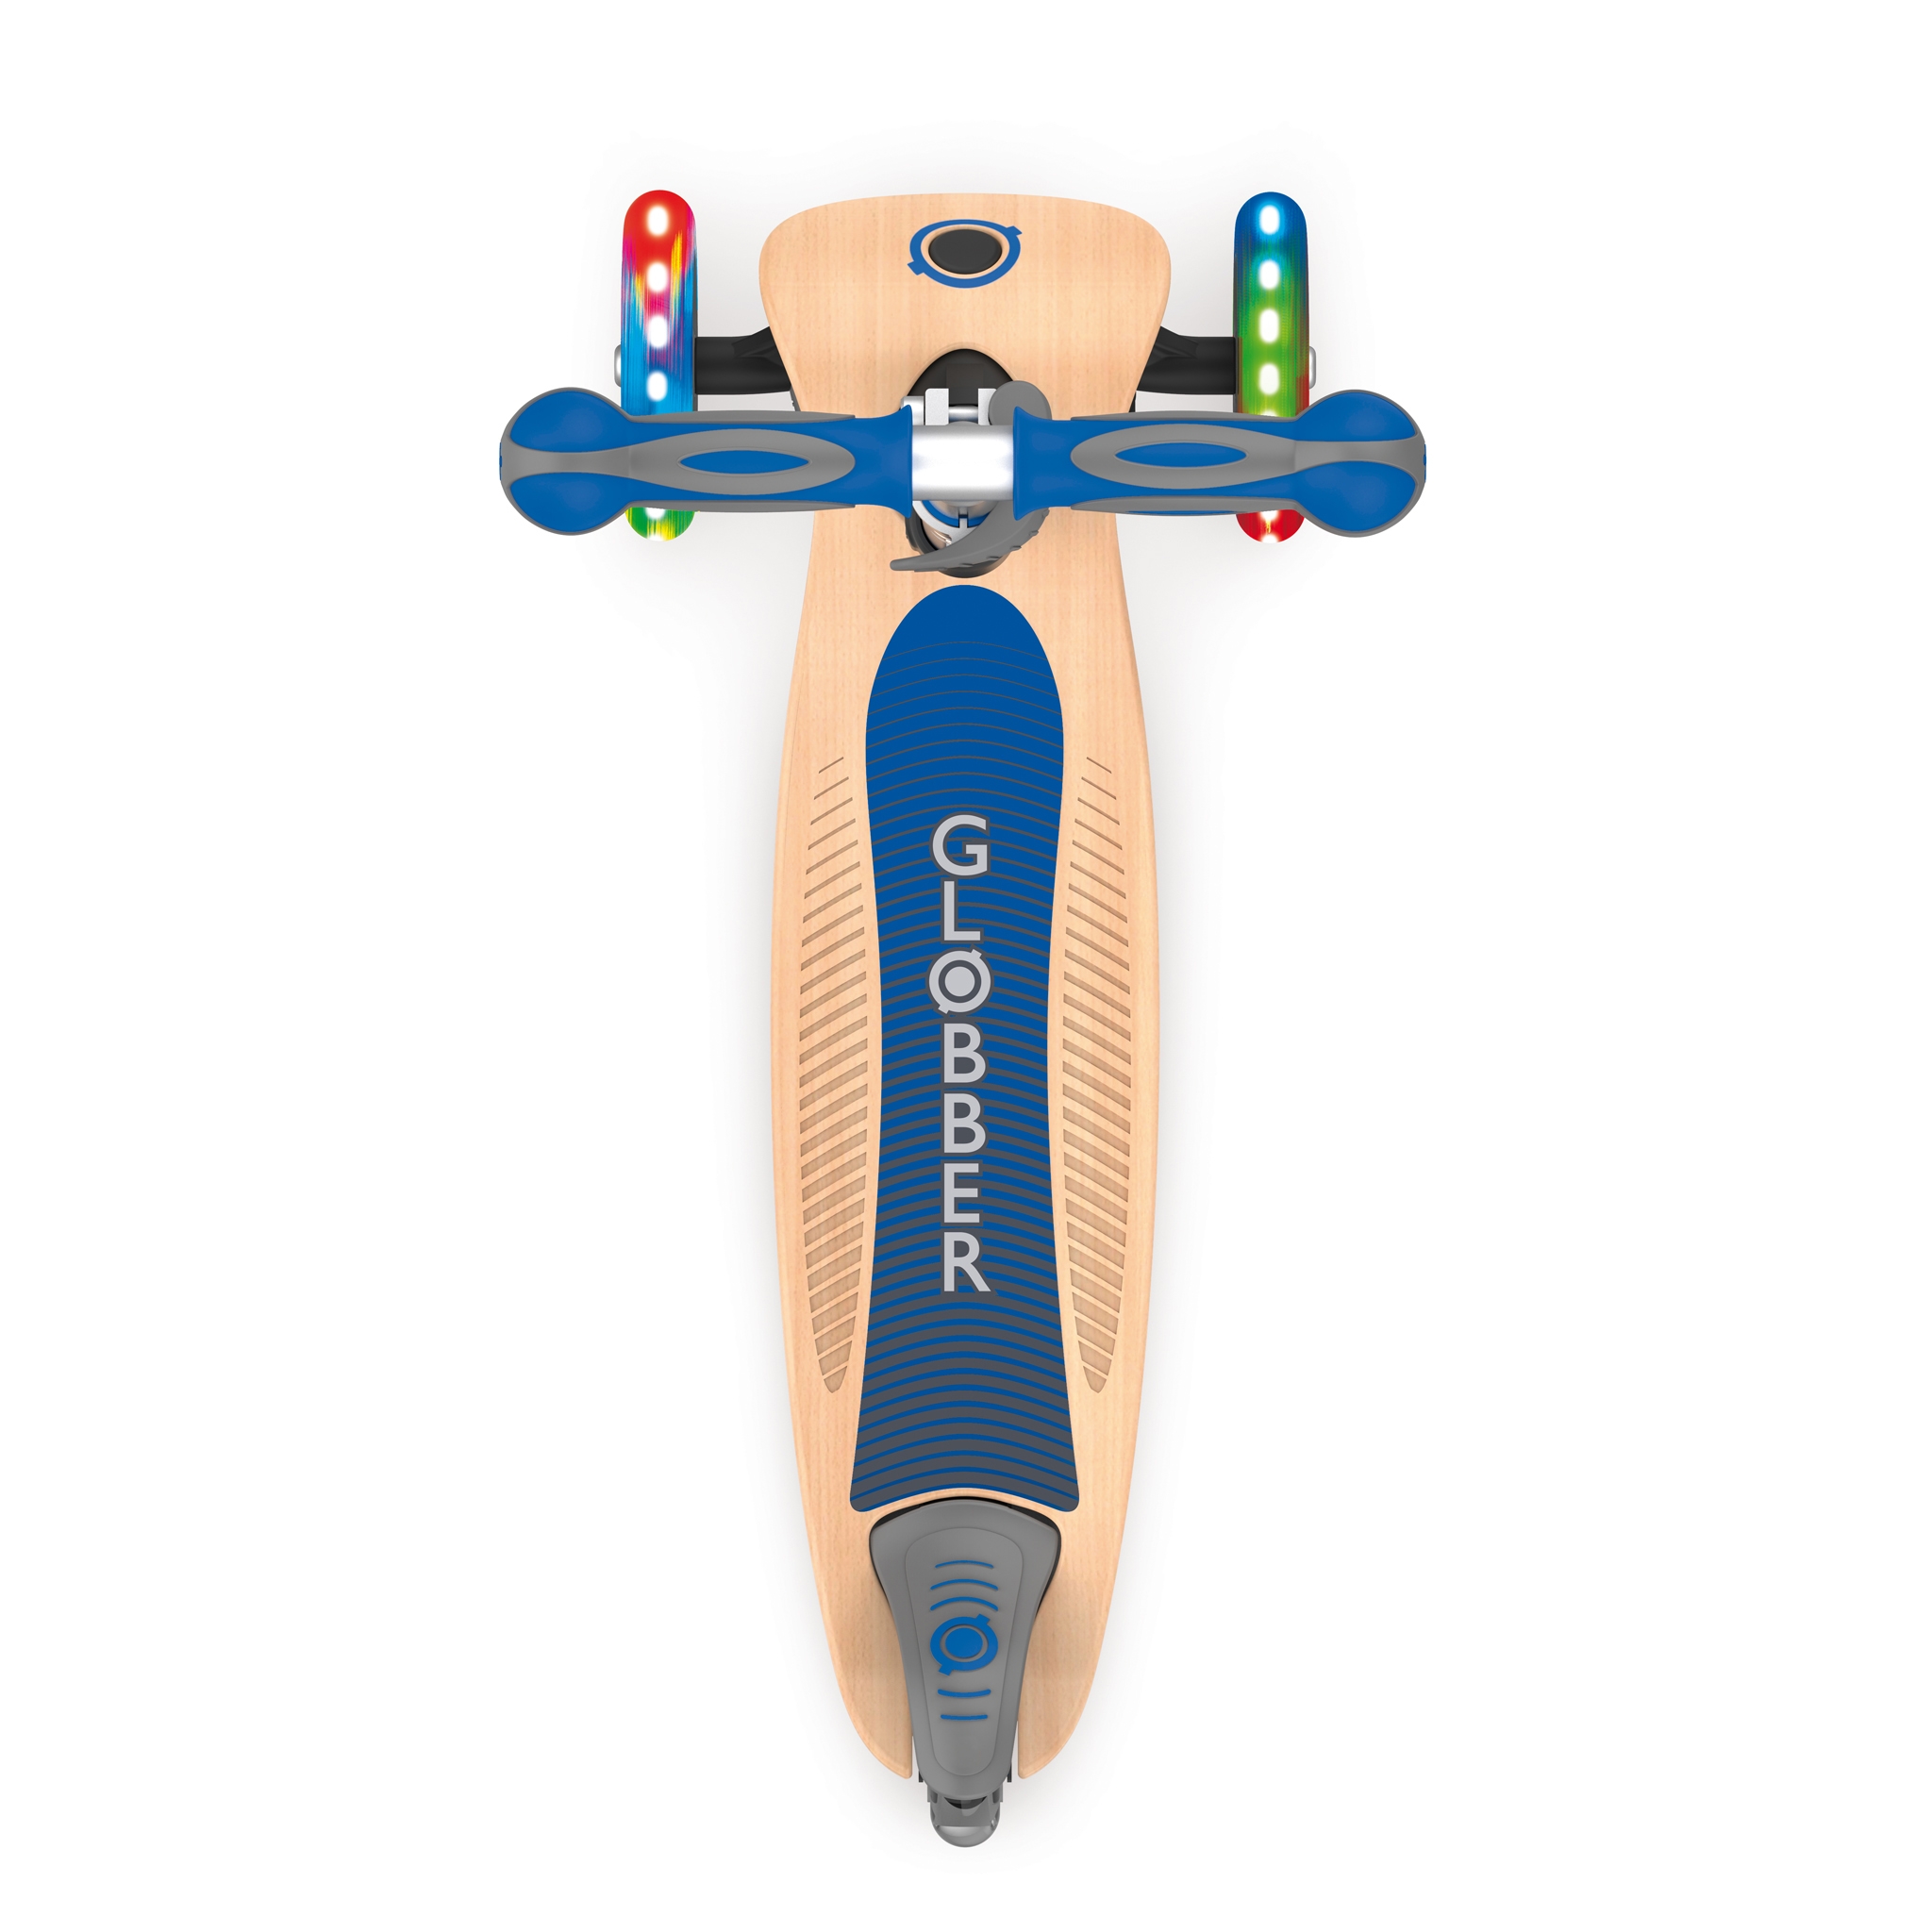 PRIMO-FOLDABLE-WOOD-LIGHTS-3-wheel-with-7-ply-wooden-scooter-deck-and-laser-engraved-sides-on-the-deck_navy-blue 3